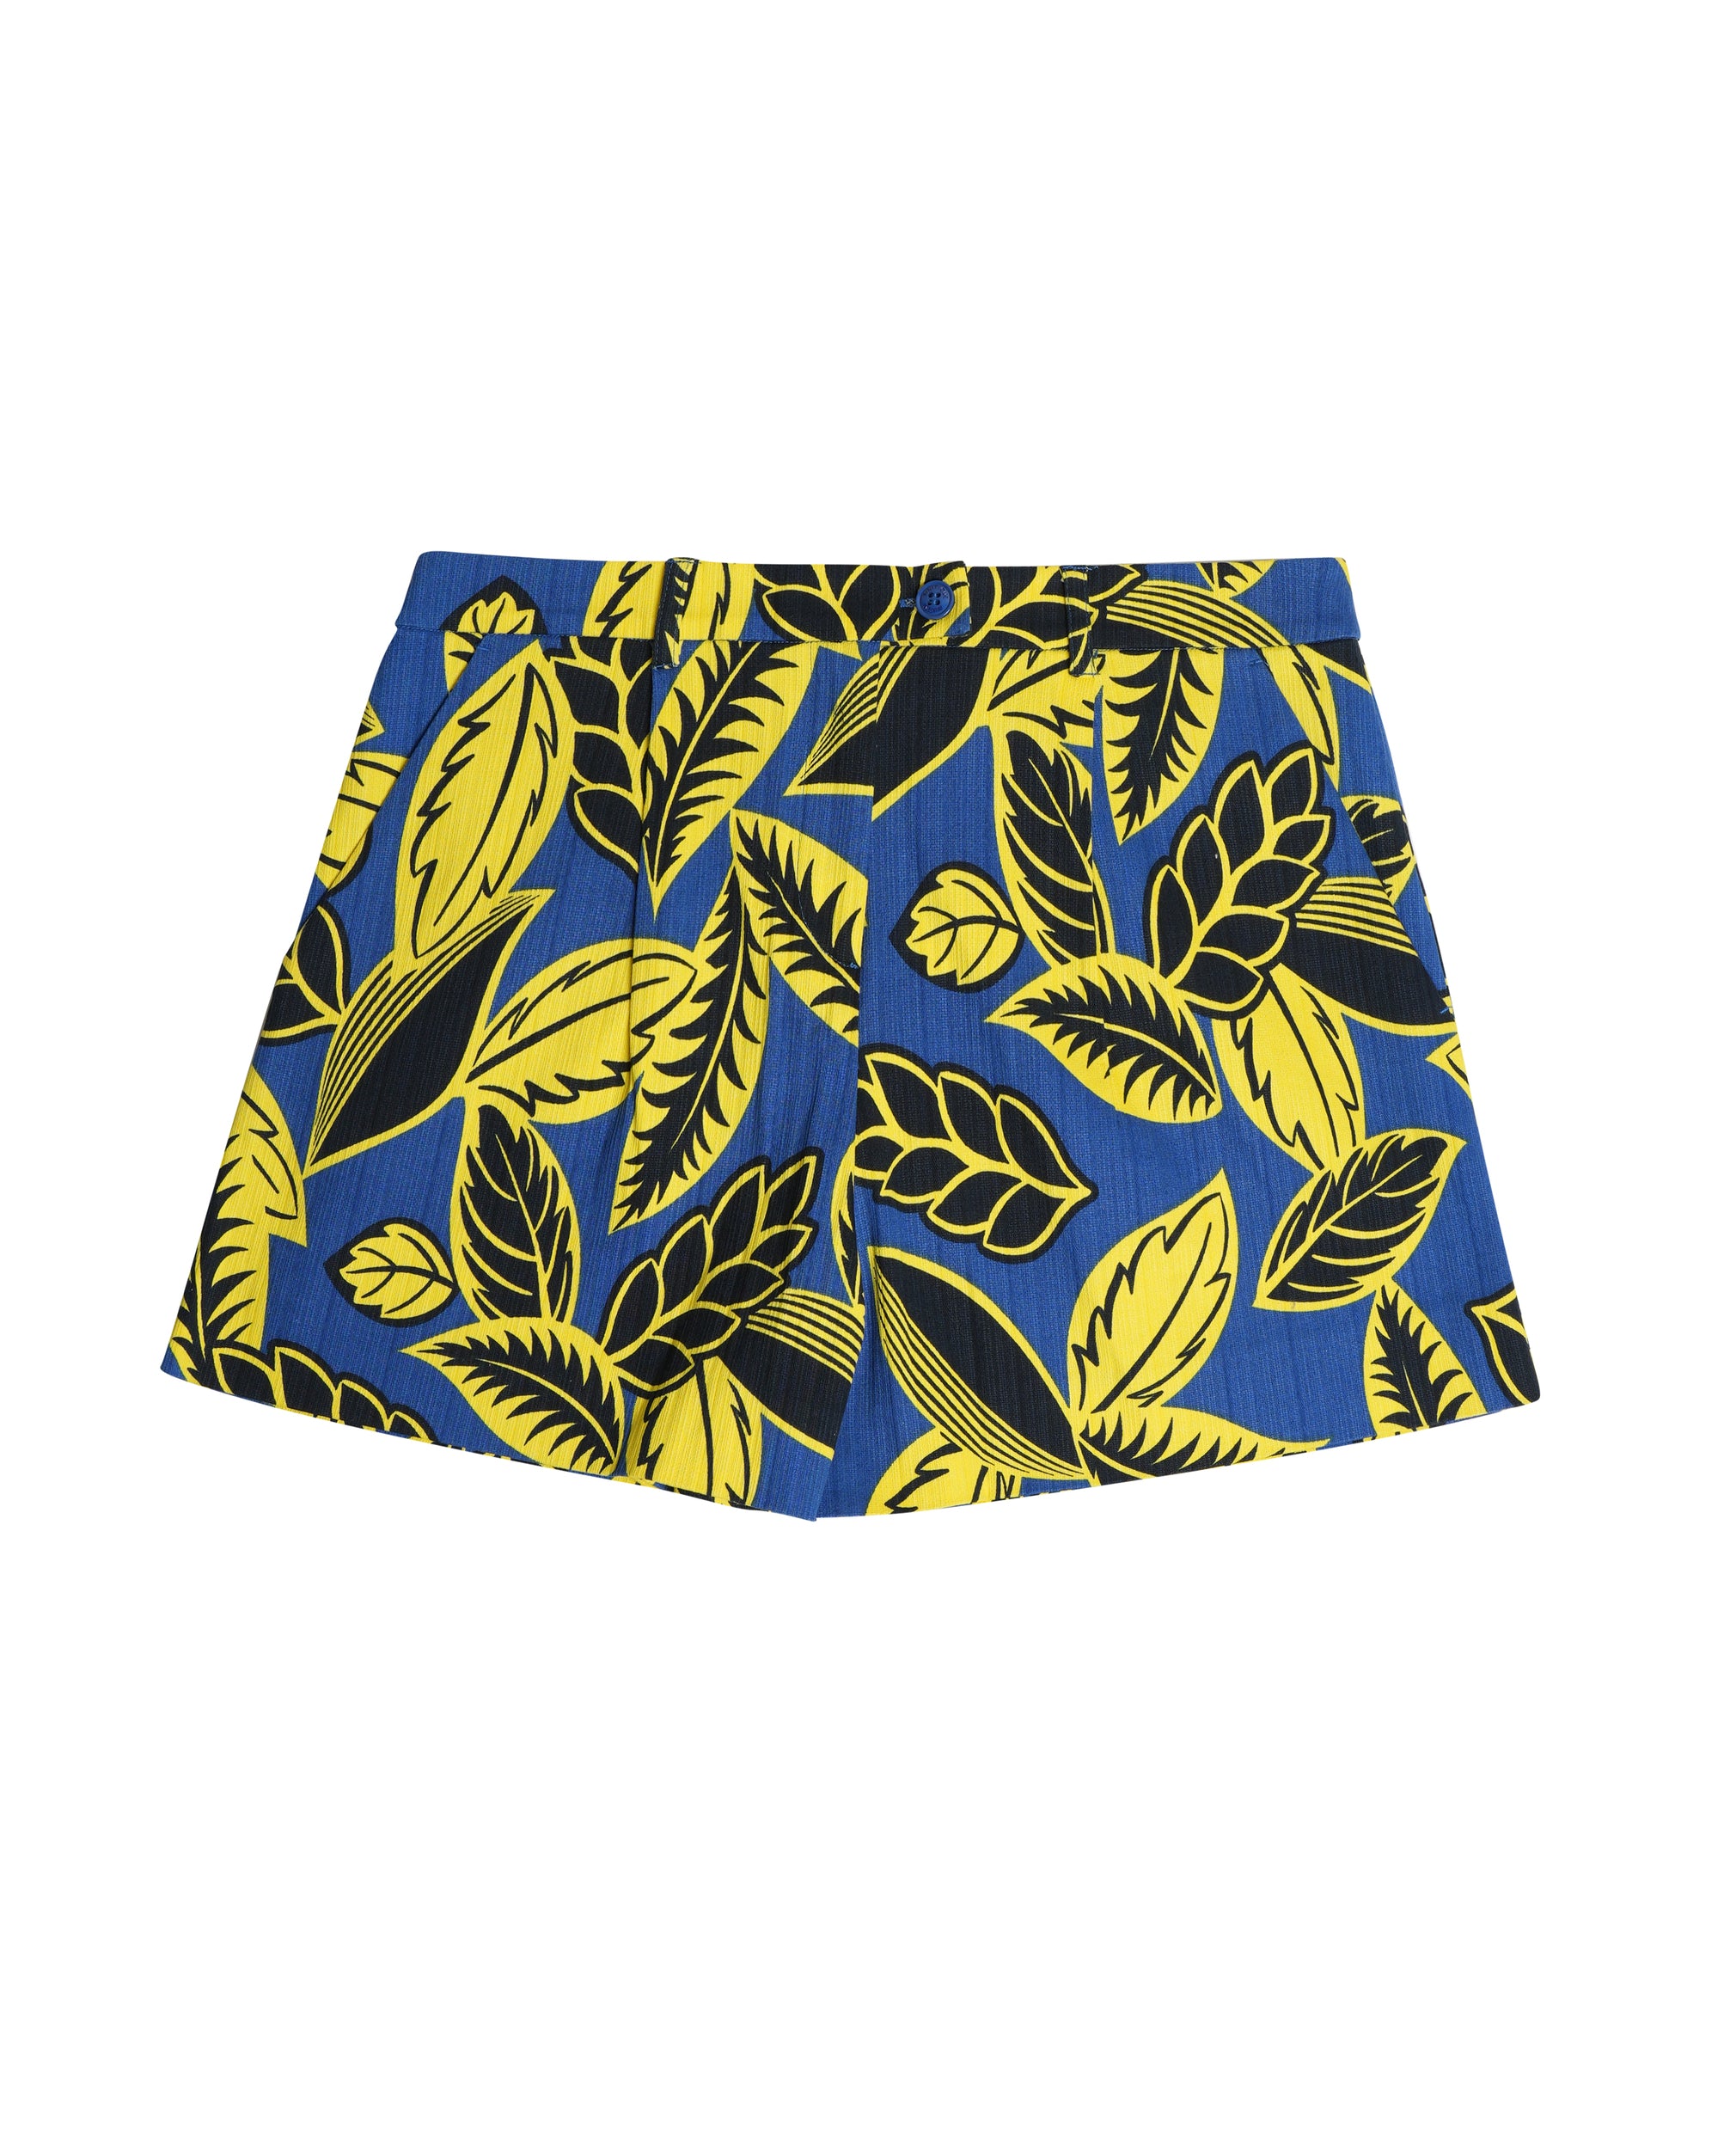 Boutique Moschino Floral Print Shorts Blue & Yellow